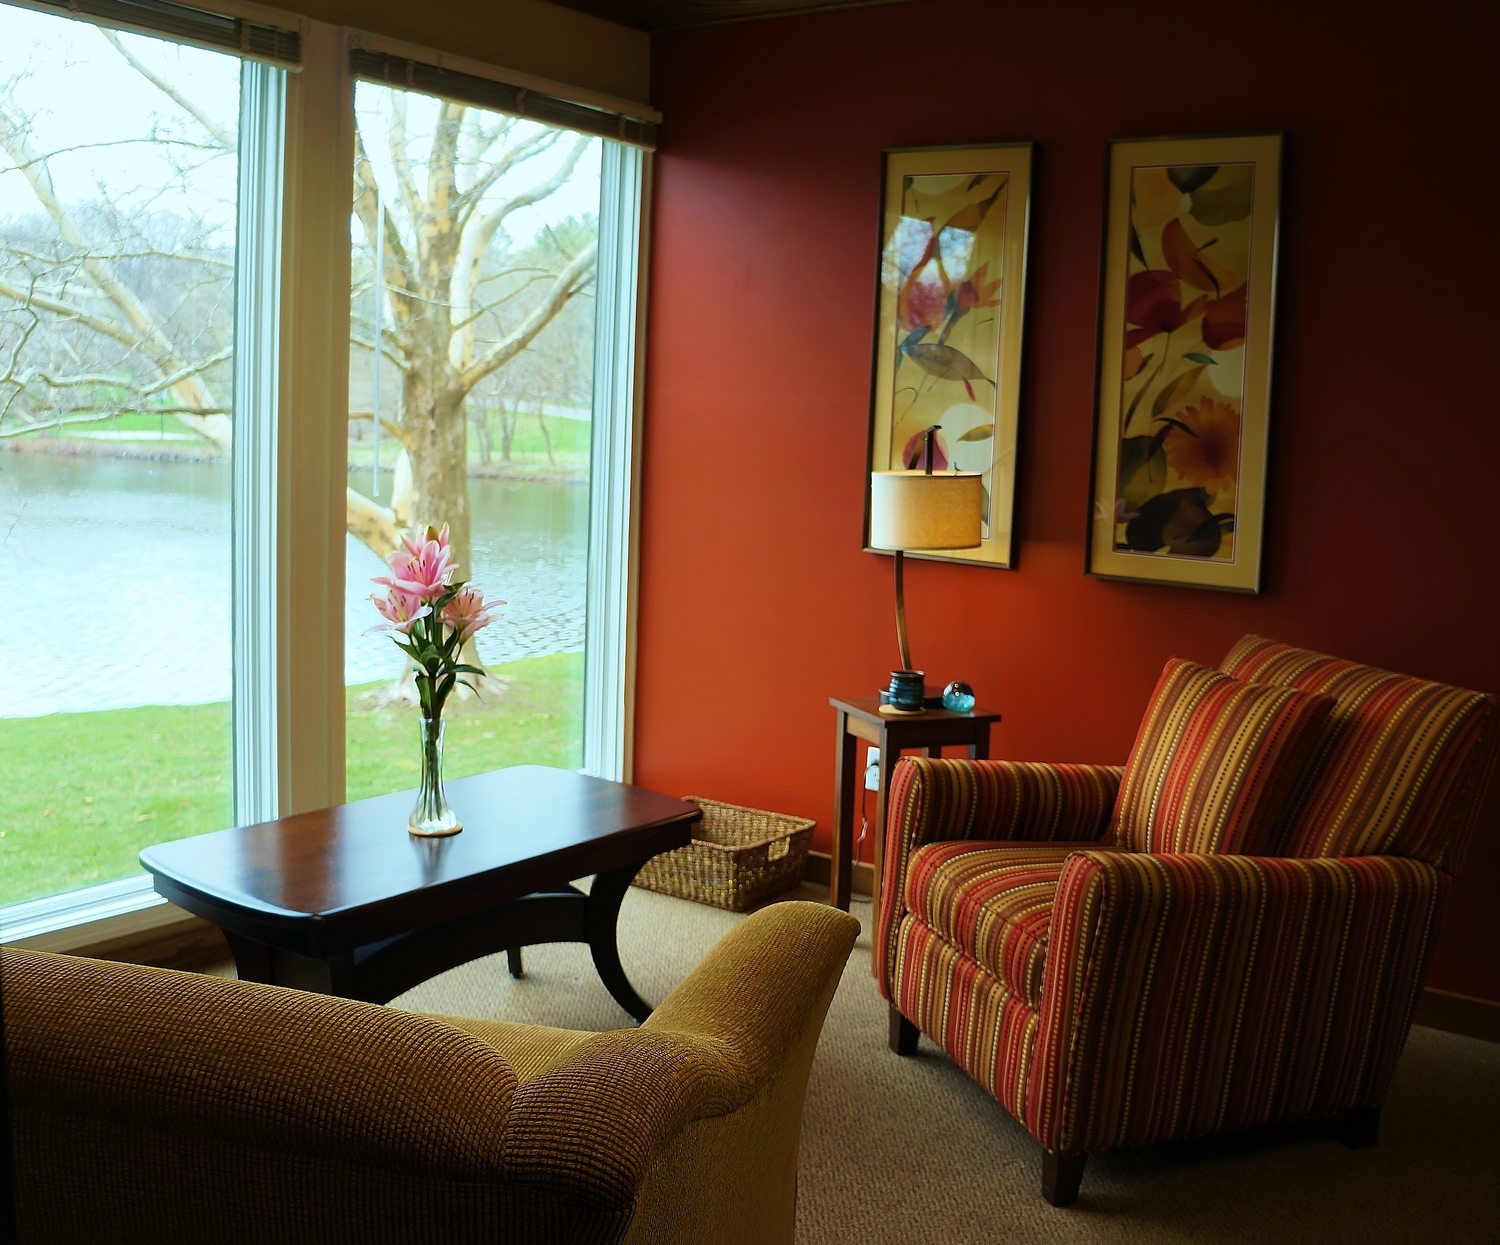 Gallery Photo of My office is in a peaceful, natural setting overlooking a small lake in Parkview Hills.